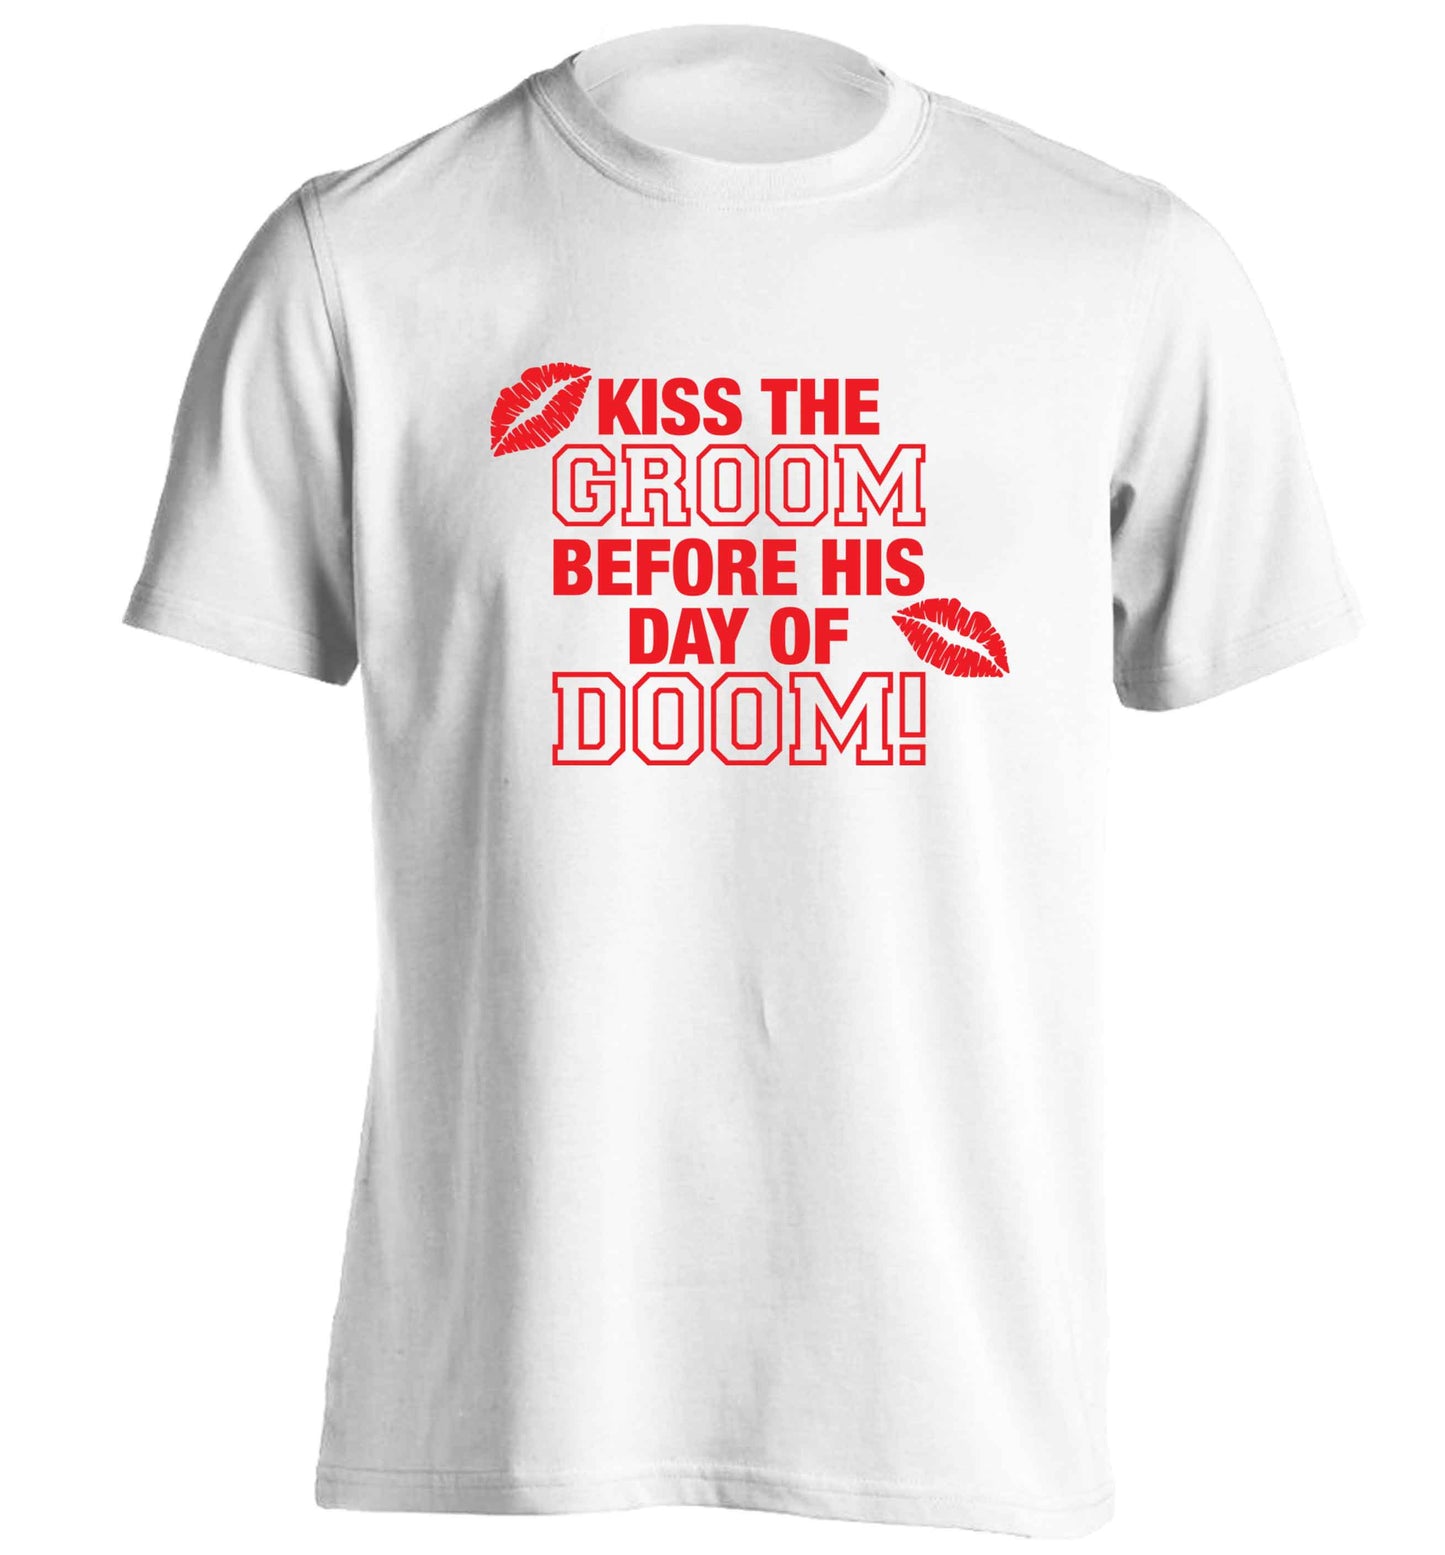 Kiss the groom before his day of doom! adults unisex white Tshirt 2XL